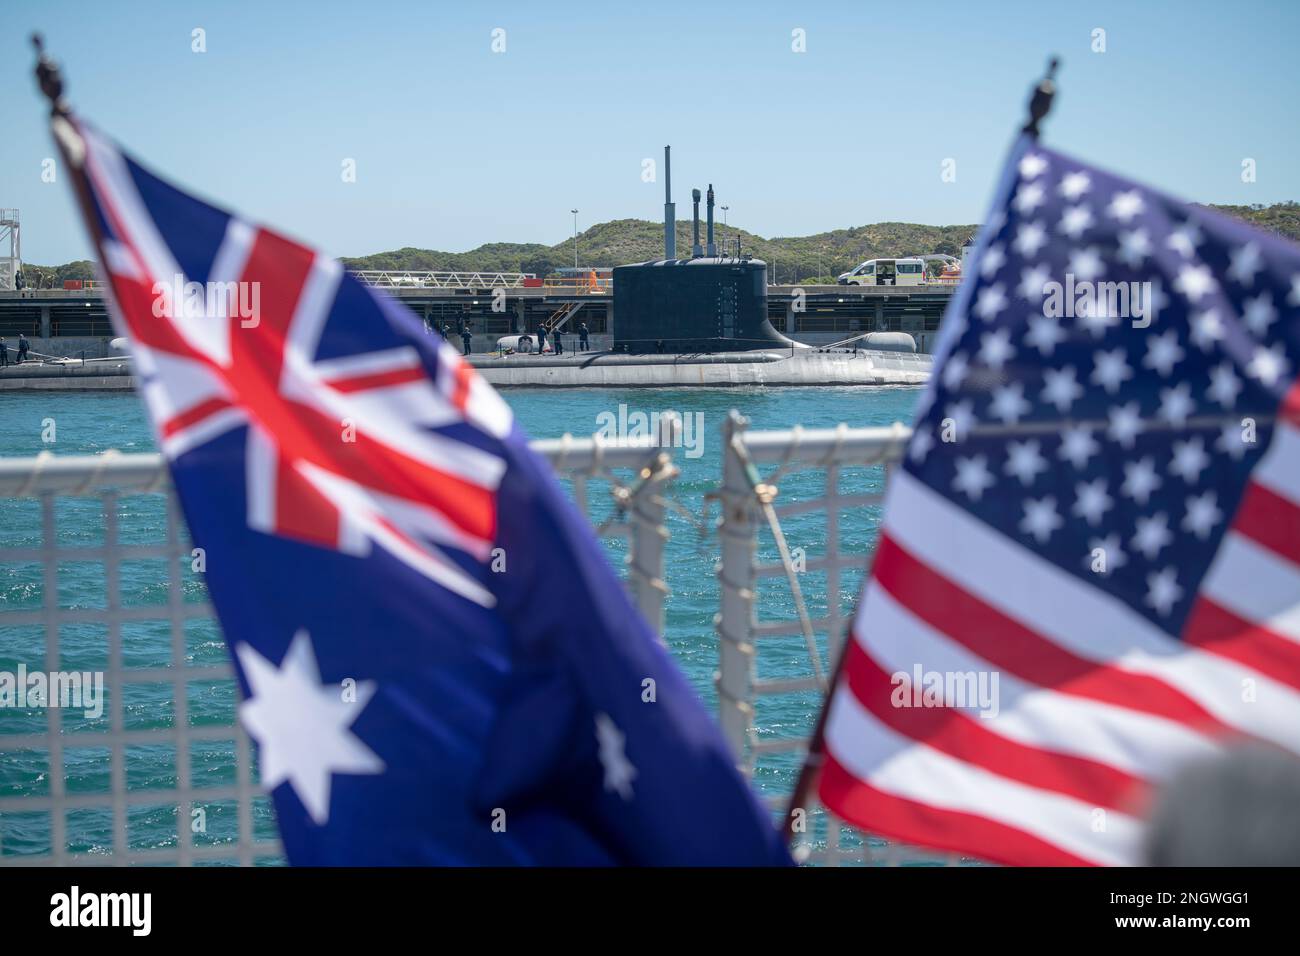 GARDEN ISLAND, Australia - The Virginia-class fast-attack submarine USS Mississippi (SSN 782) is pictured moored at Royal Australian Navy HMAS Stirling Naval Base, Nov. 28. Mississippi is currently on patrol in support of national security interests in the U.S. 7th Fleet area of operations. Stock Photo